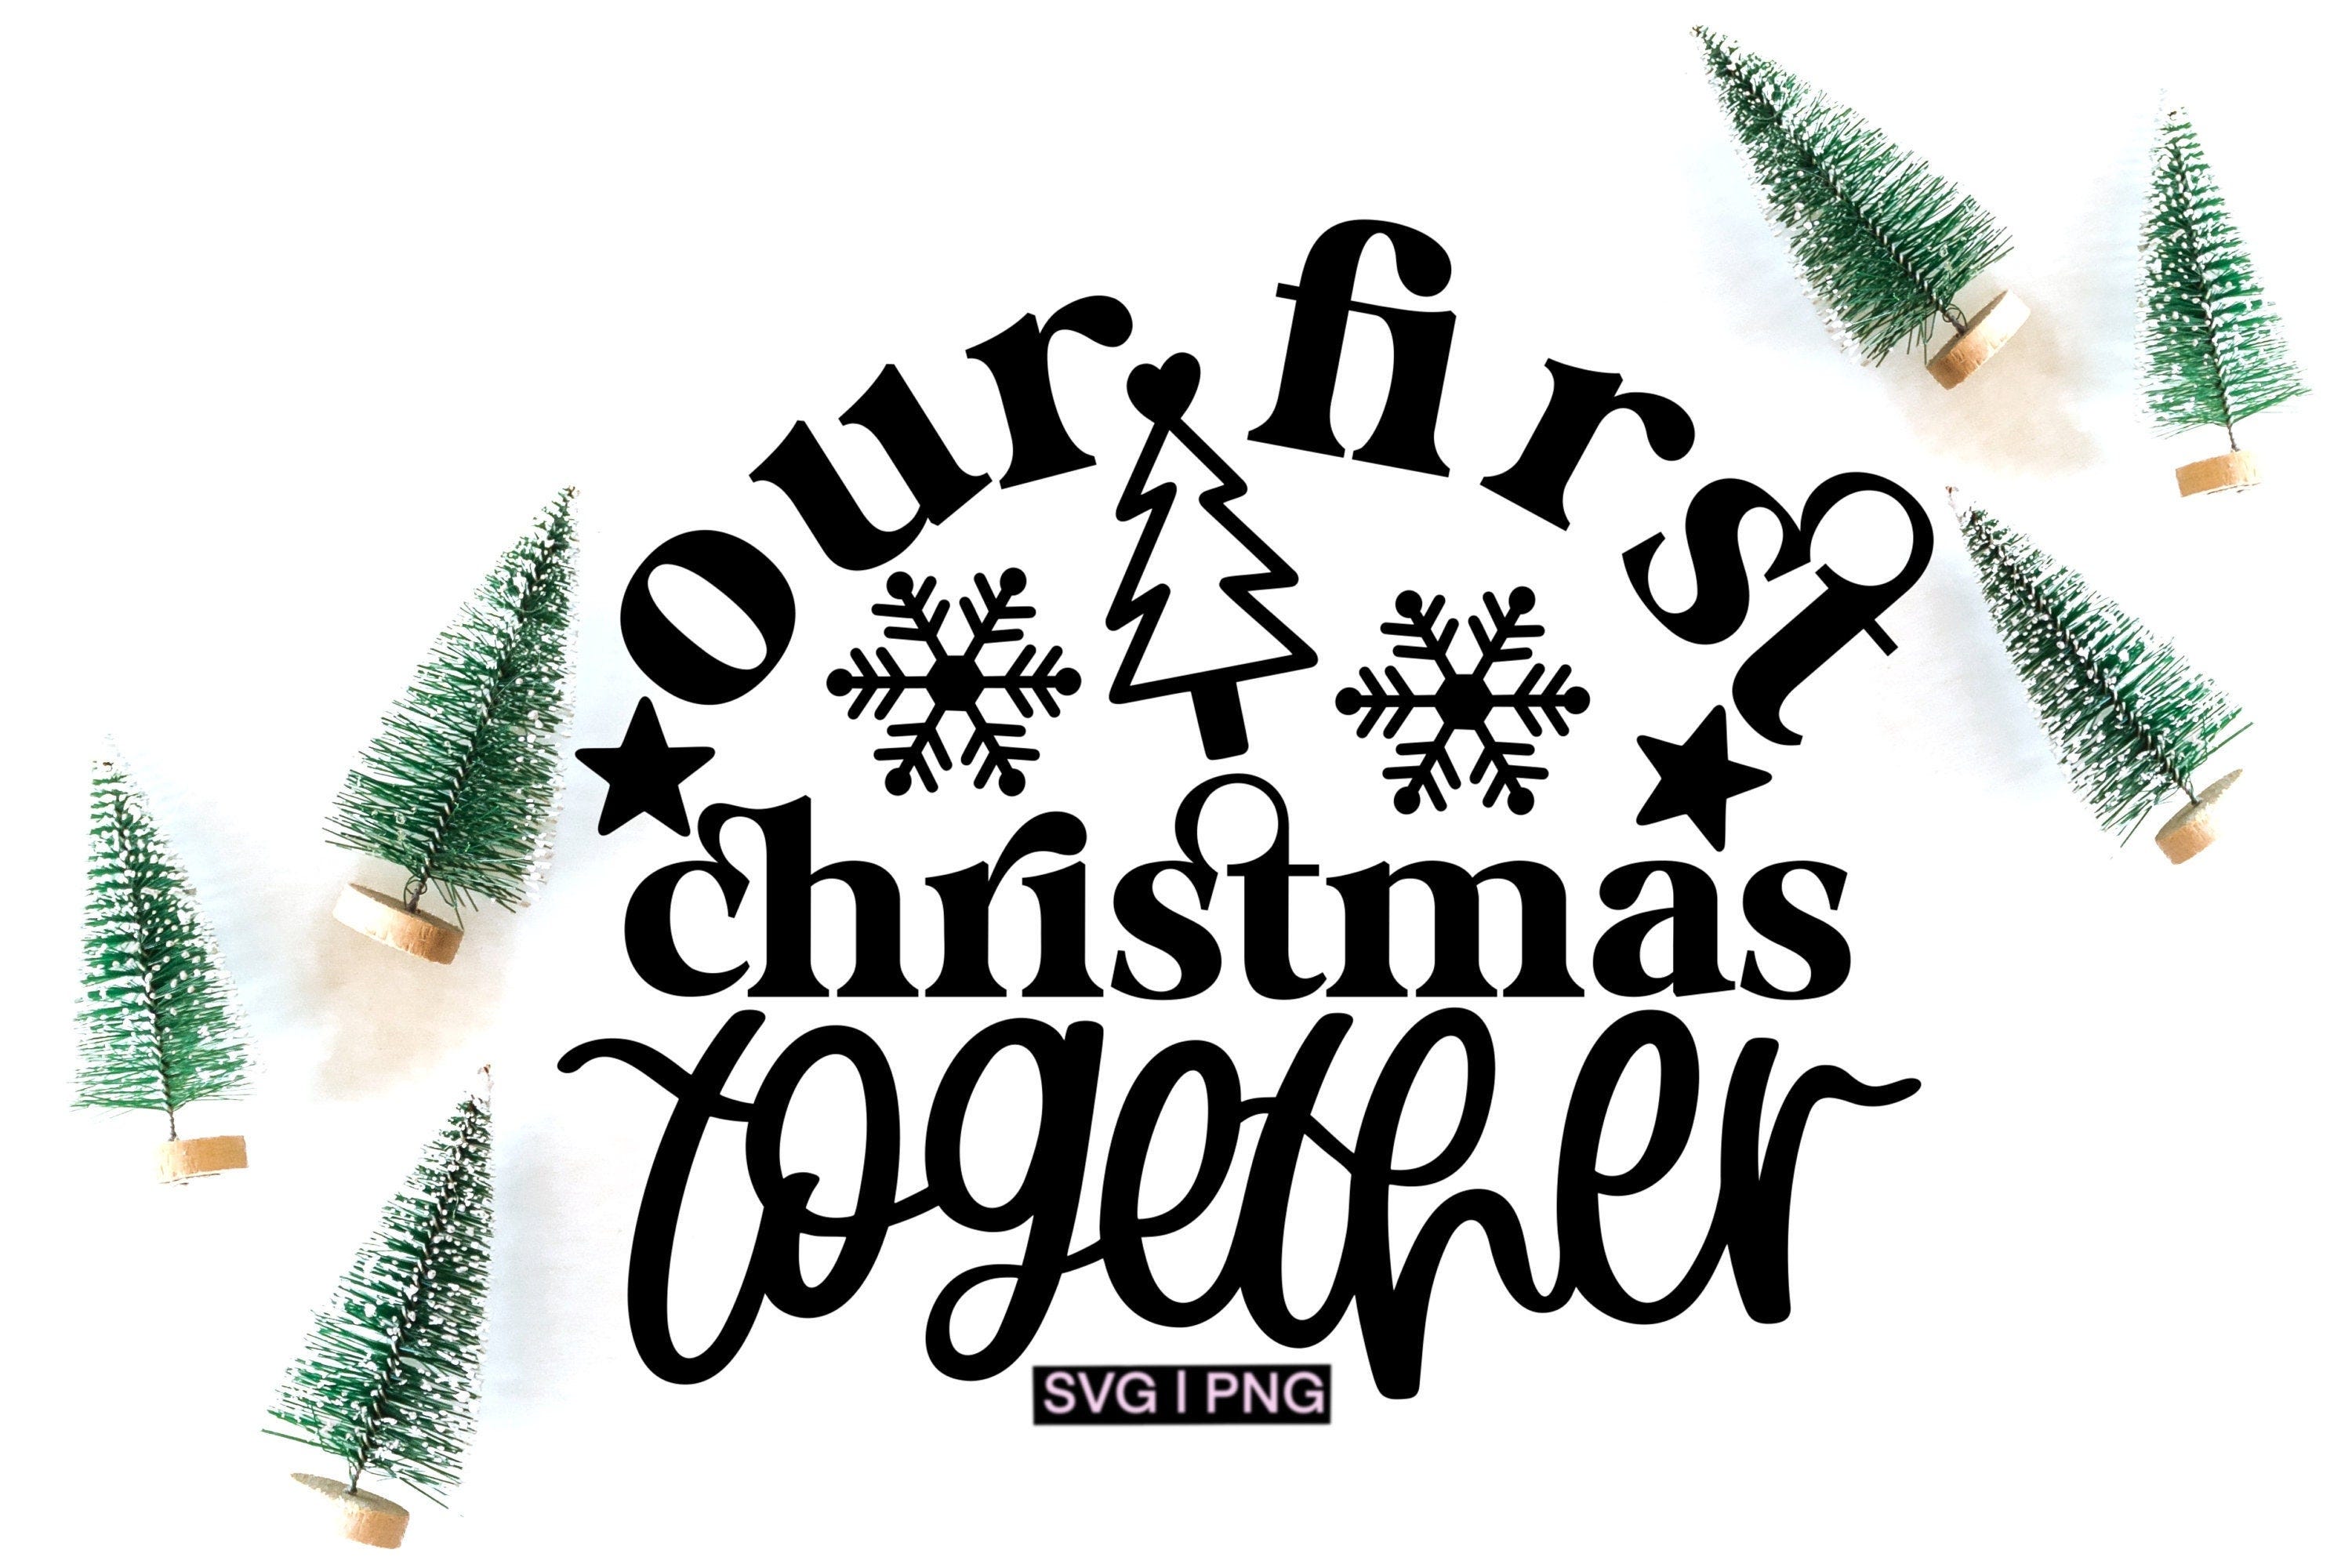 Our first christmas together svg, christmas ornament svg, mr and mrs svg, christmas couple svg, christmas decor svg, hand lettered svg, png